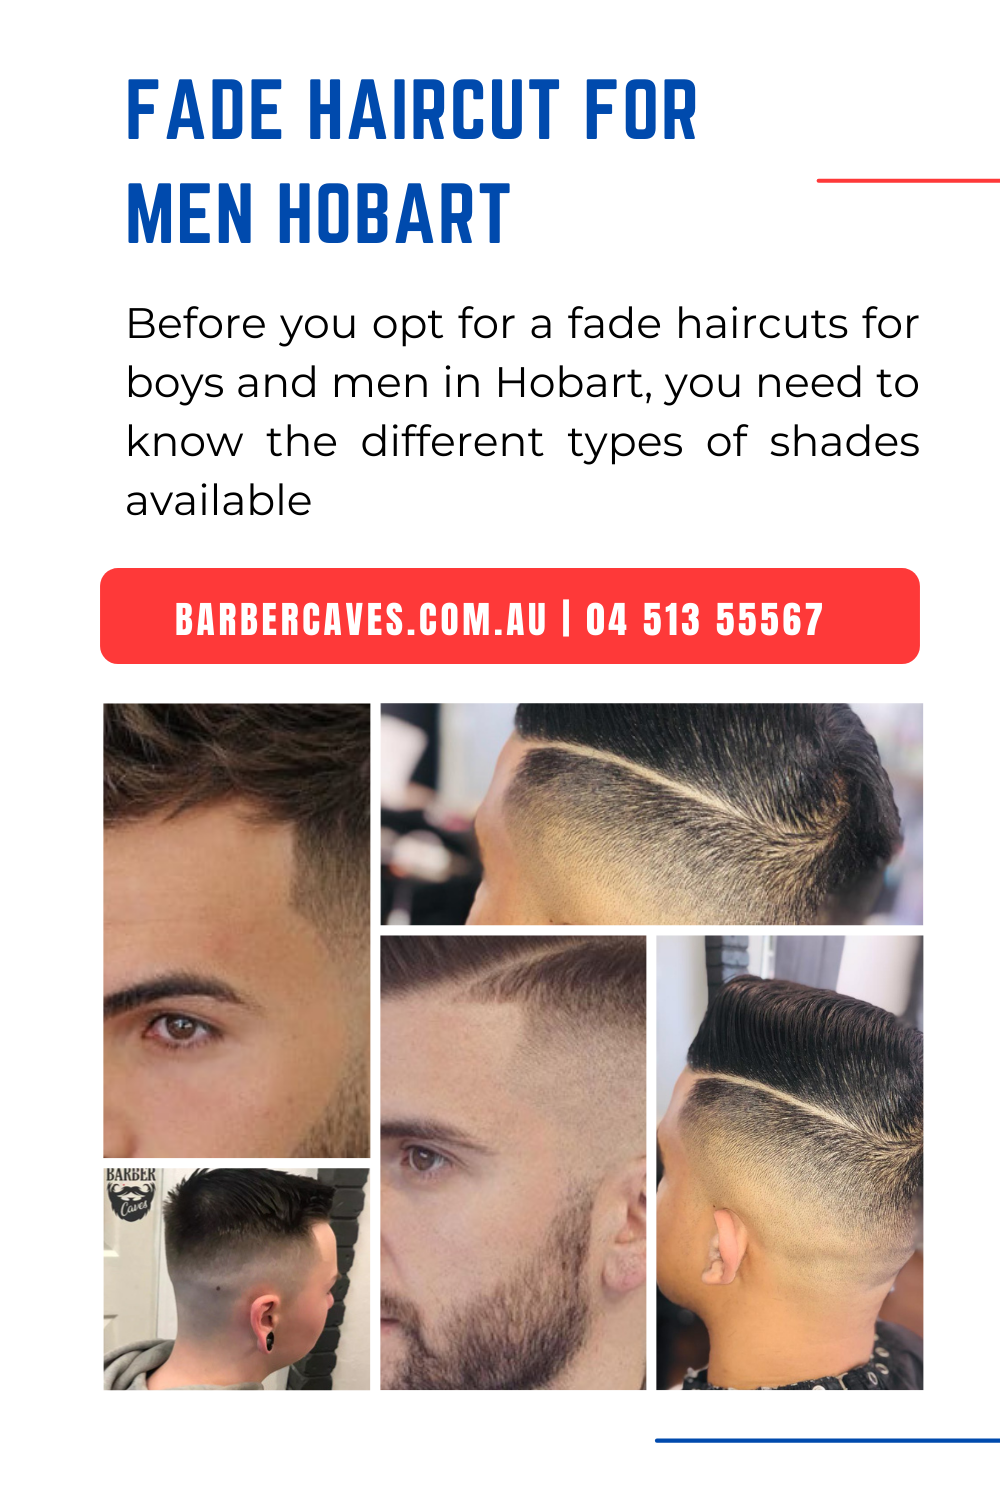 The Types of Fade Haircuts for Men and Boys Likely to Rock 2022